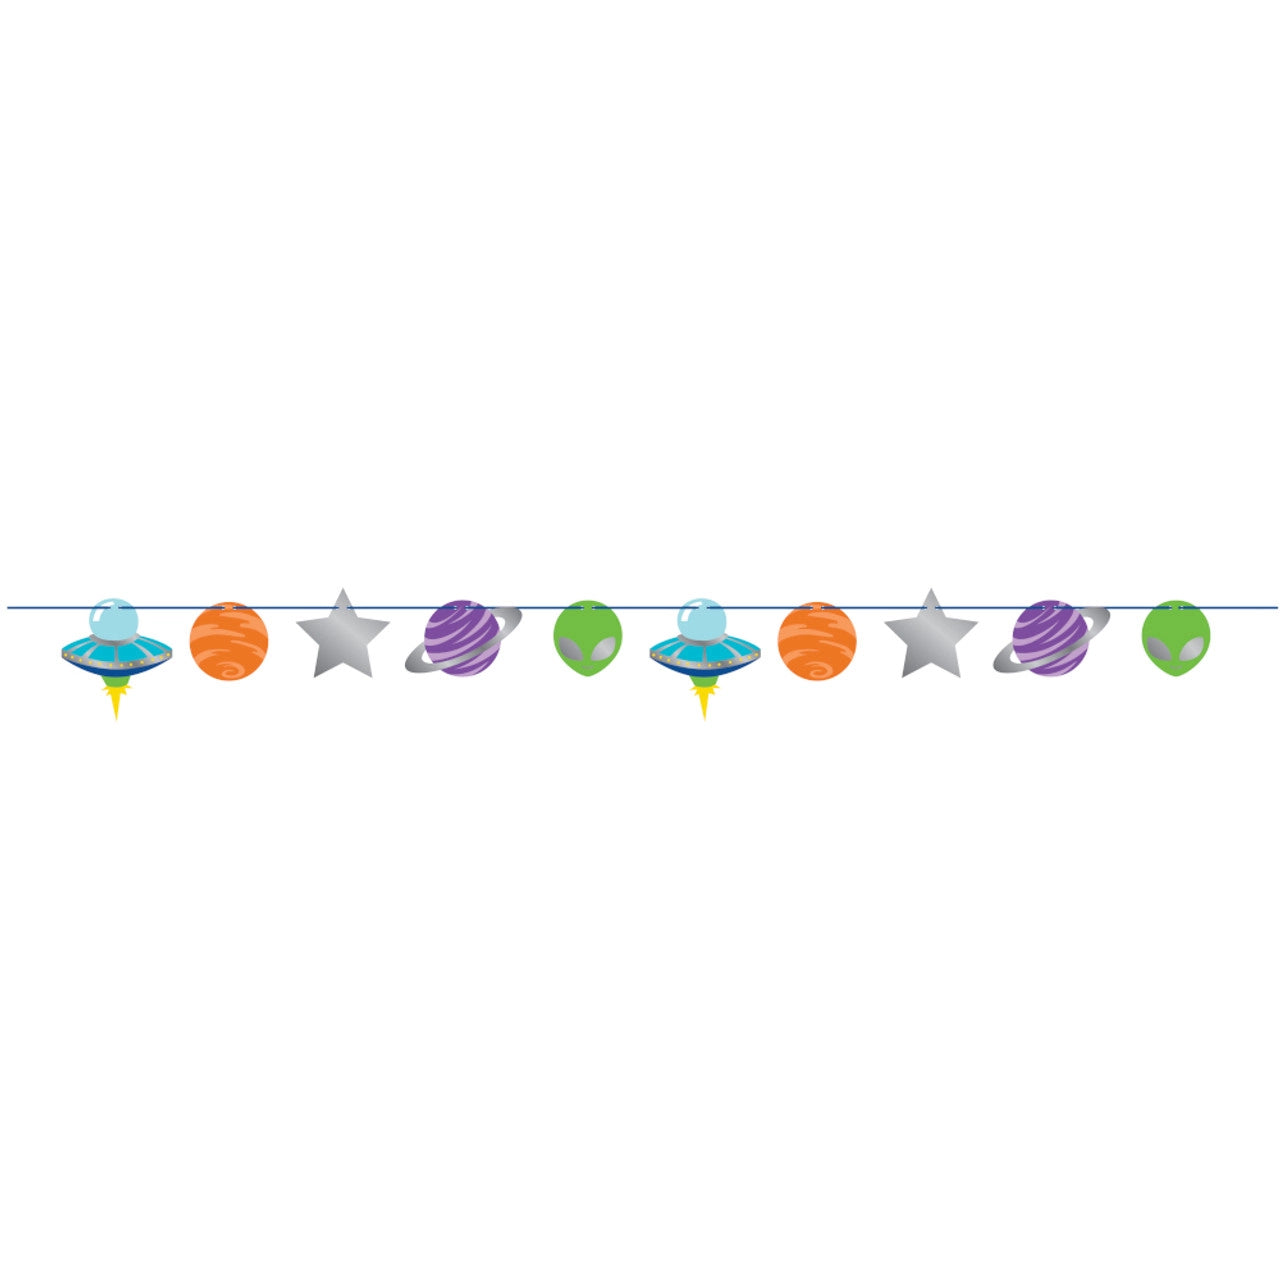 Space Party Foil Shaped Ribbon Banner 